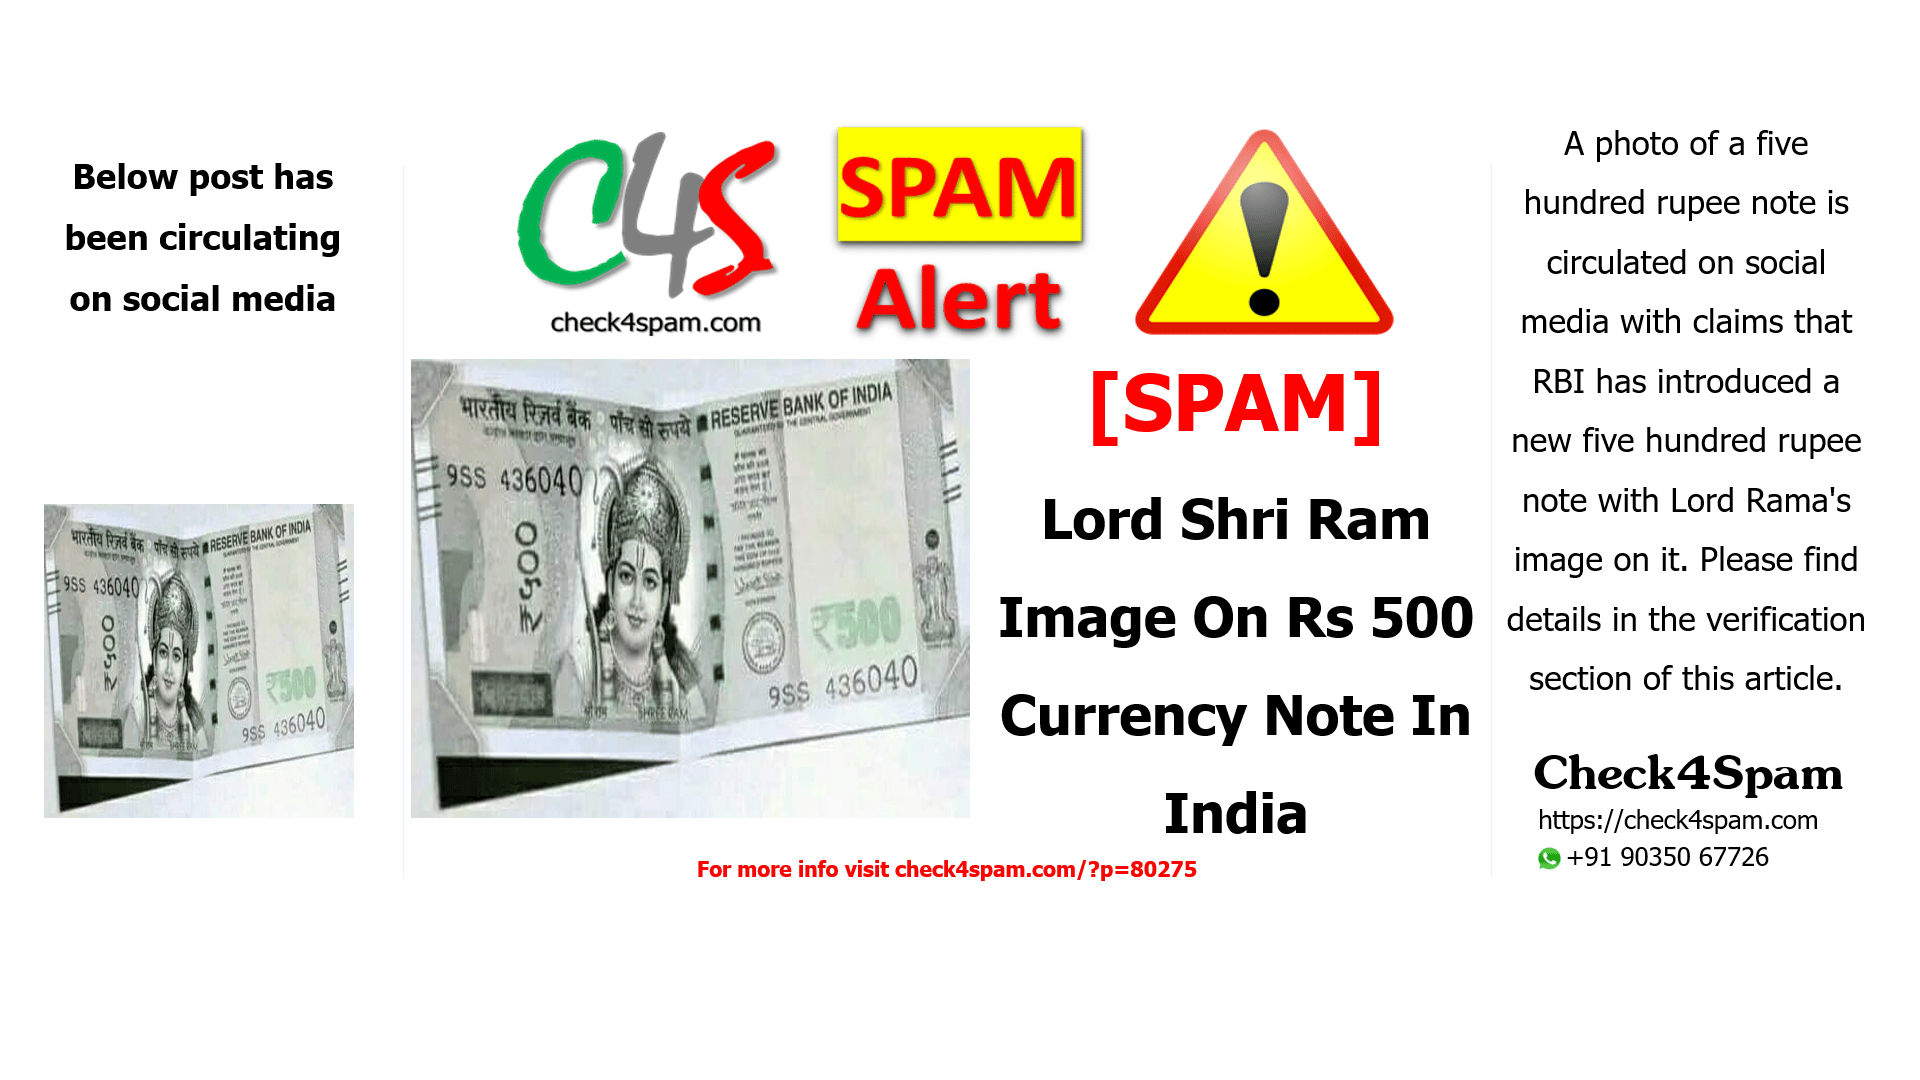 Lord Shri Ram Image On Rs 500 Currency Note In India